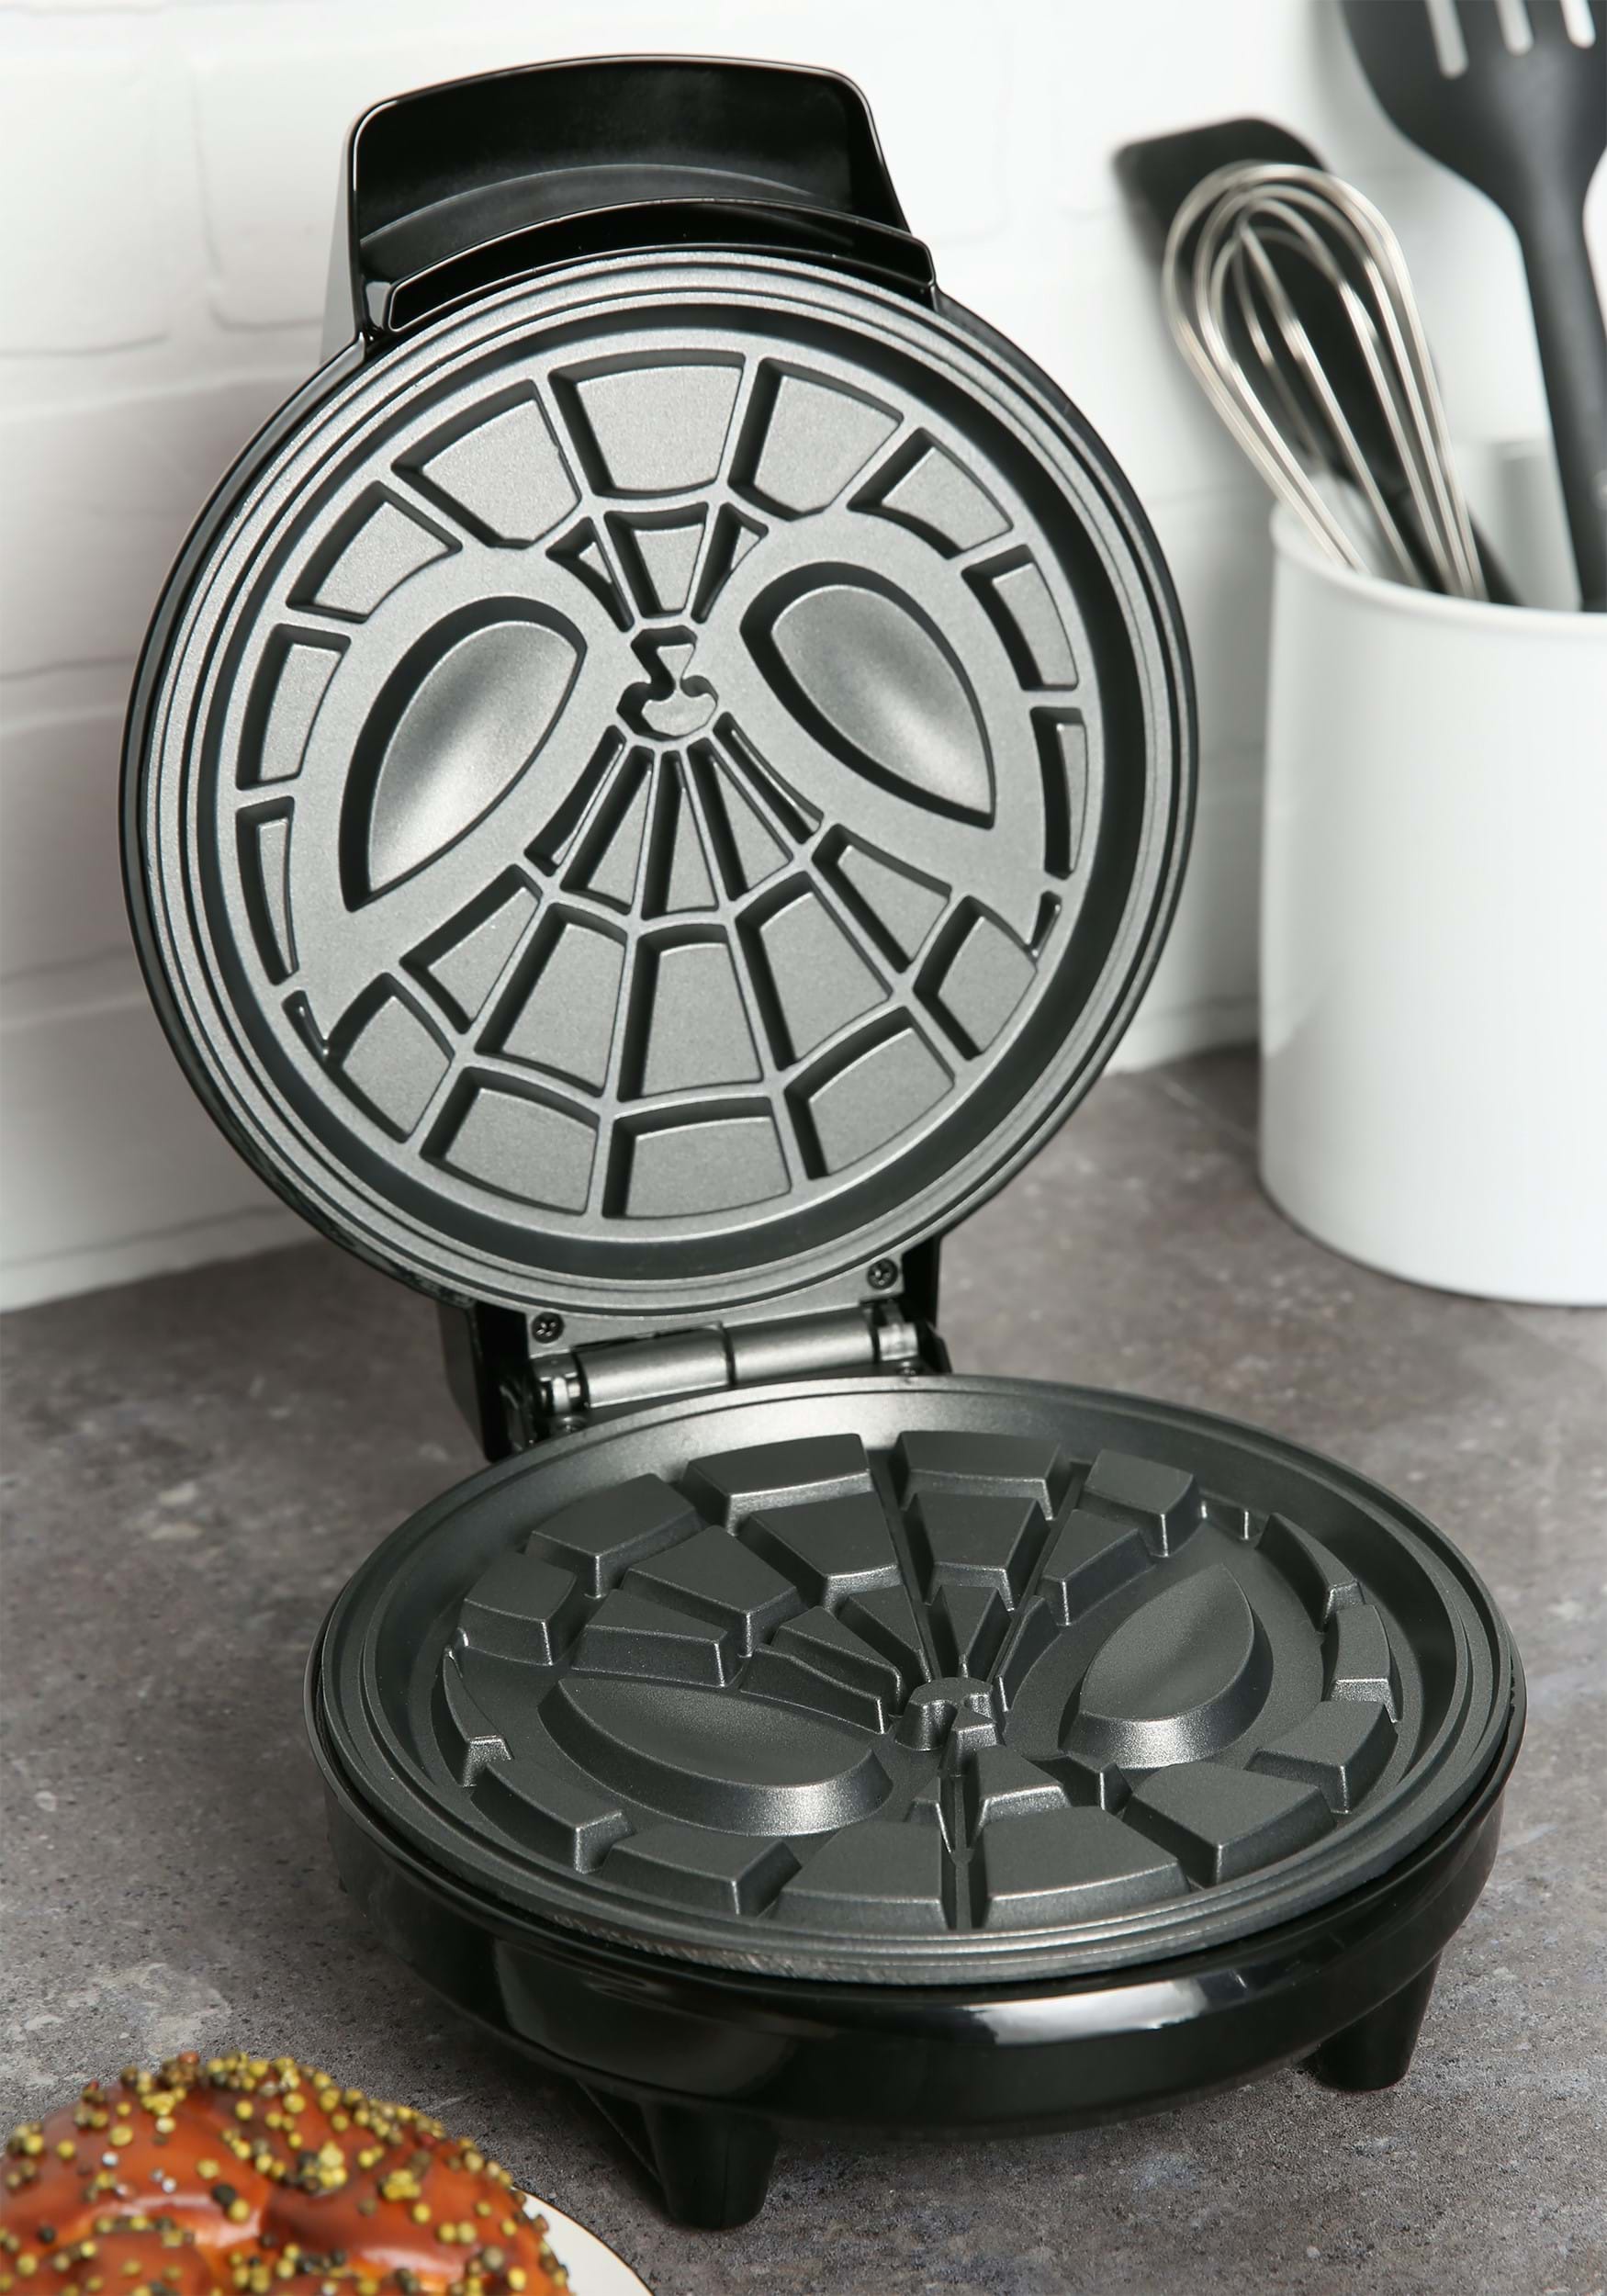 https://images.fun.com/products/49743/1-1/spiderman-waffle-maker1-1.jpg